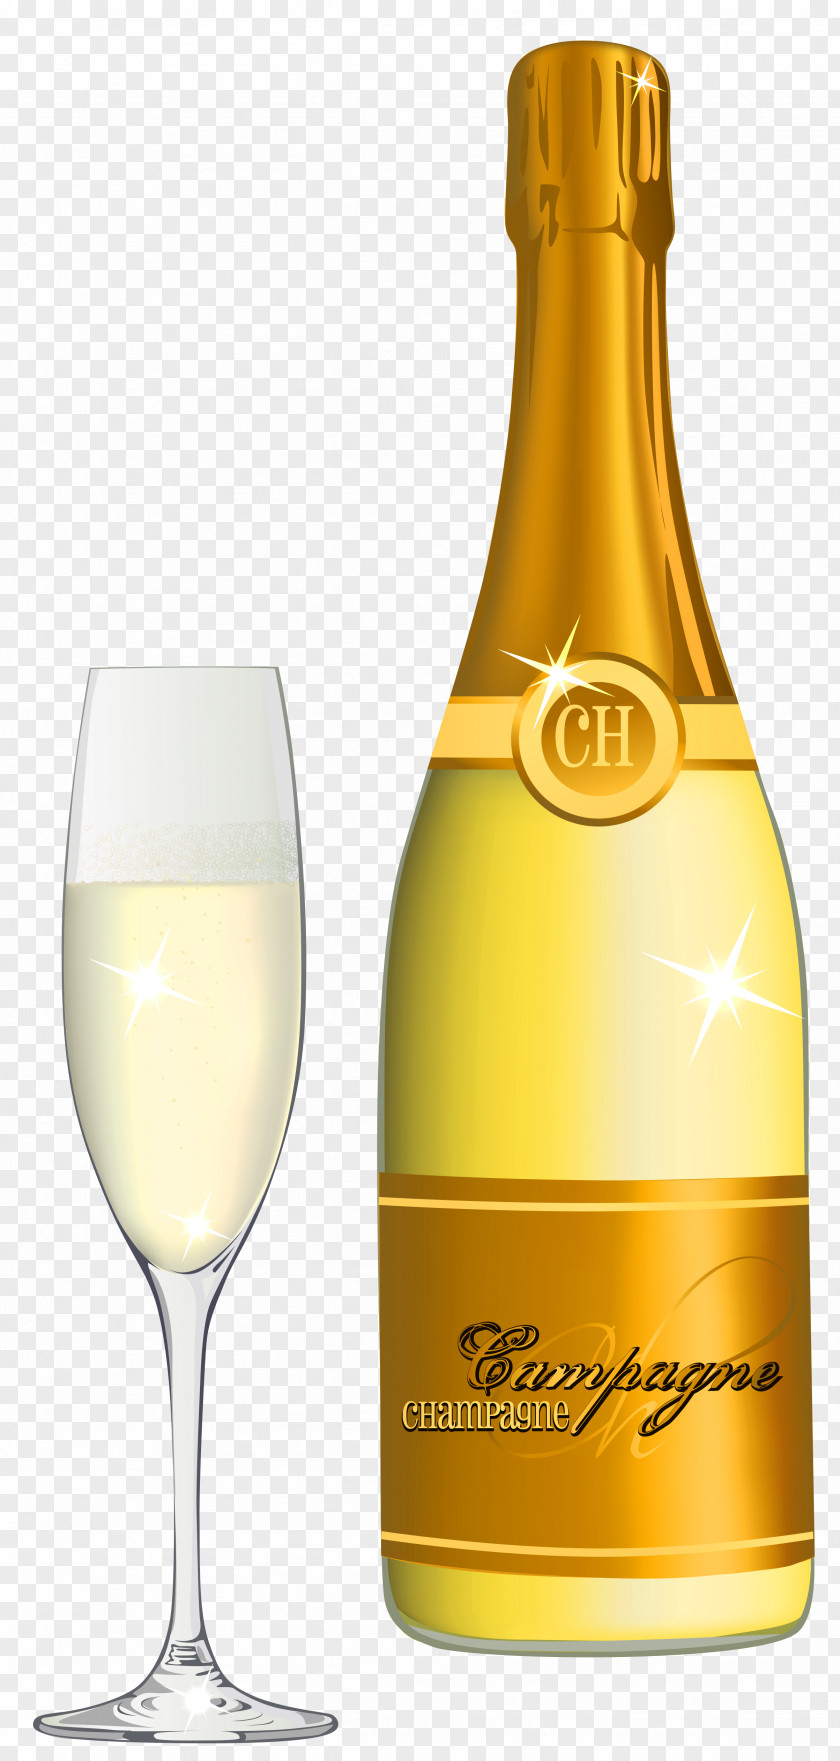 Champagne And Glass Vector Clipart Image Cocktail Beer Clip Art PNG